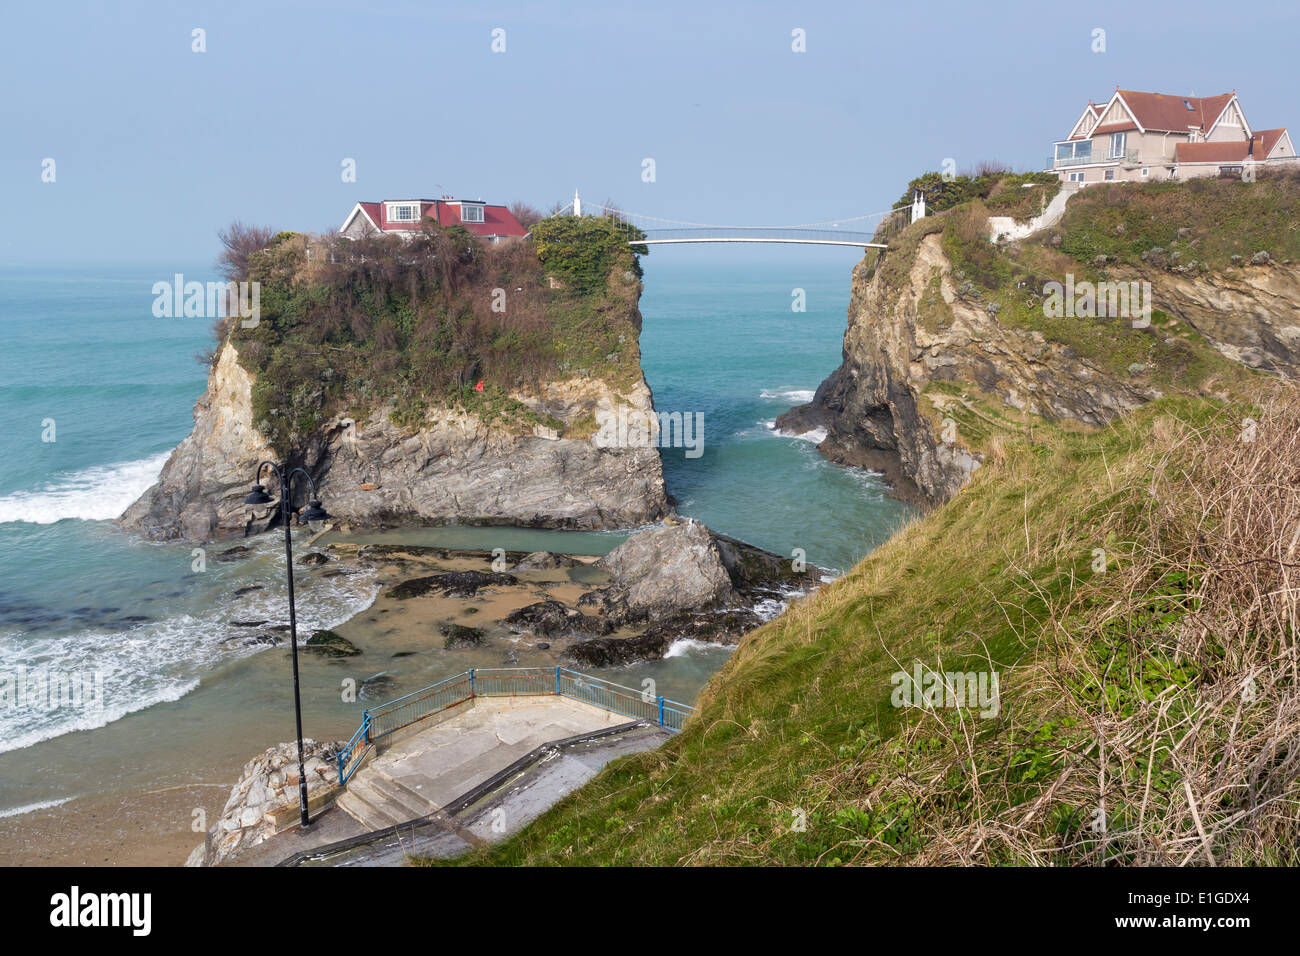 The Island on Town Beach at Newquay Cornwall England UK Europe Stock Photo